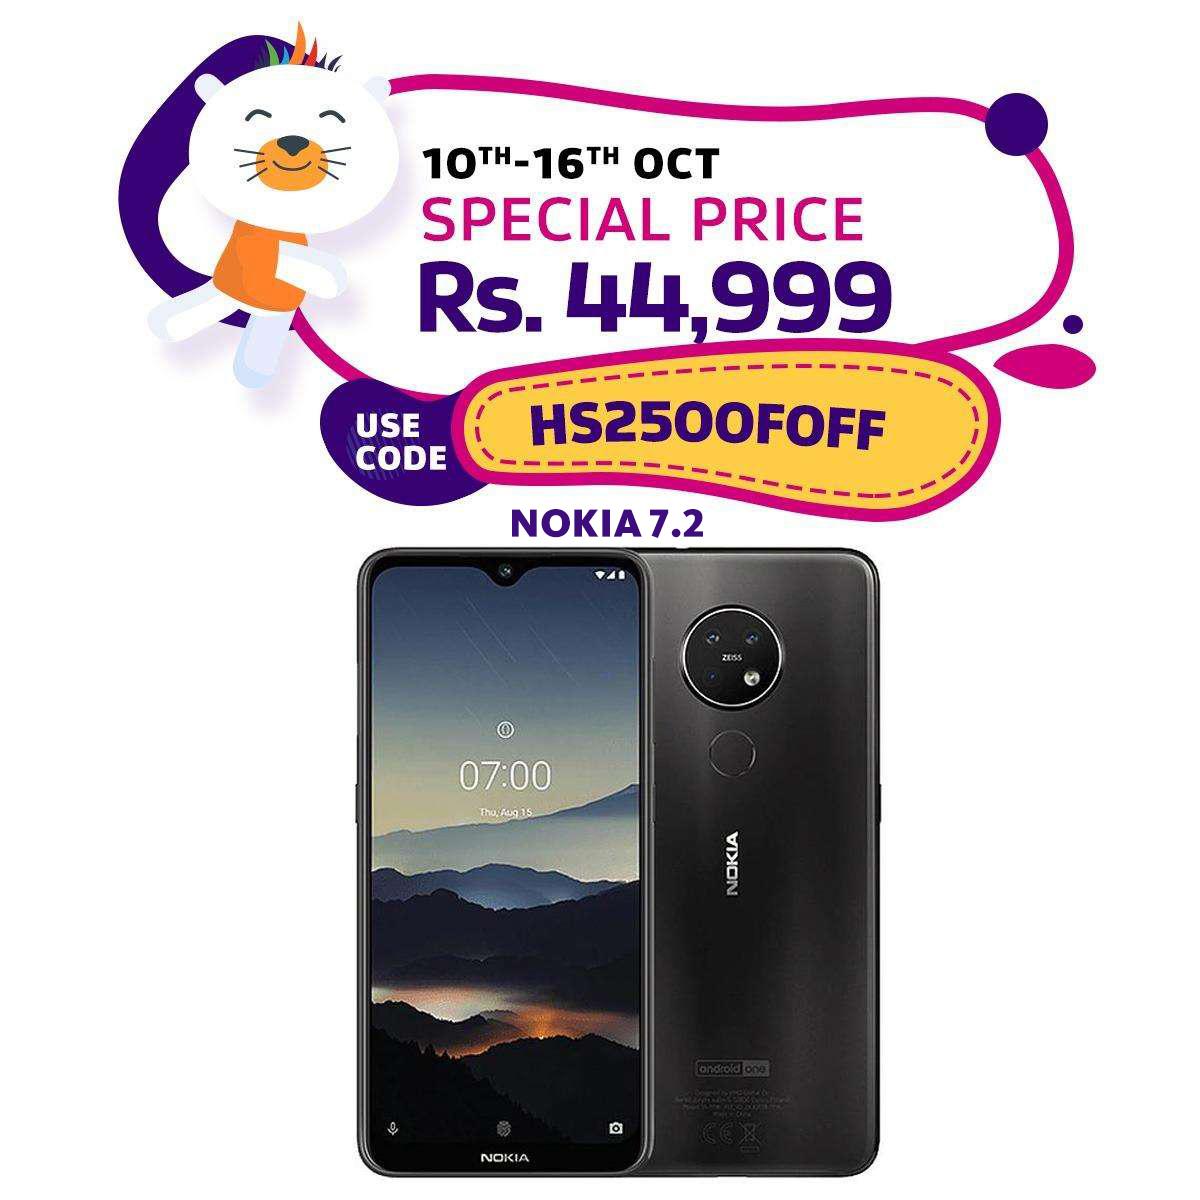 GET THE NEW NOKIA 7.2 AND 6.2 IN AN AMAZING PRICE EXCLUSIVELY AT DARAZ.PK